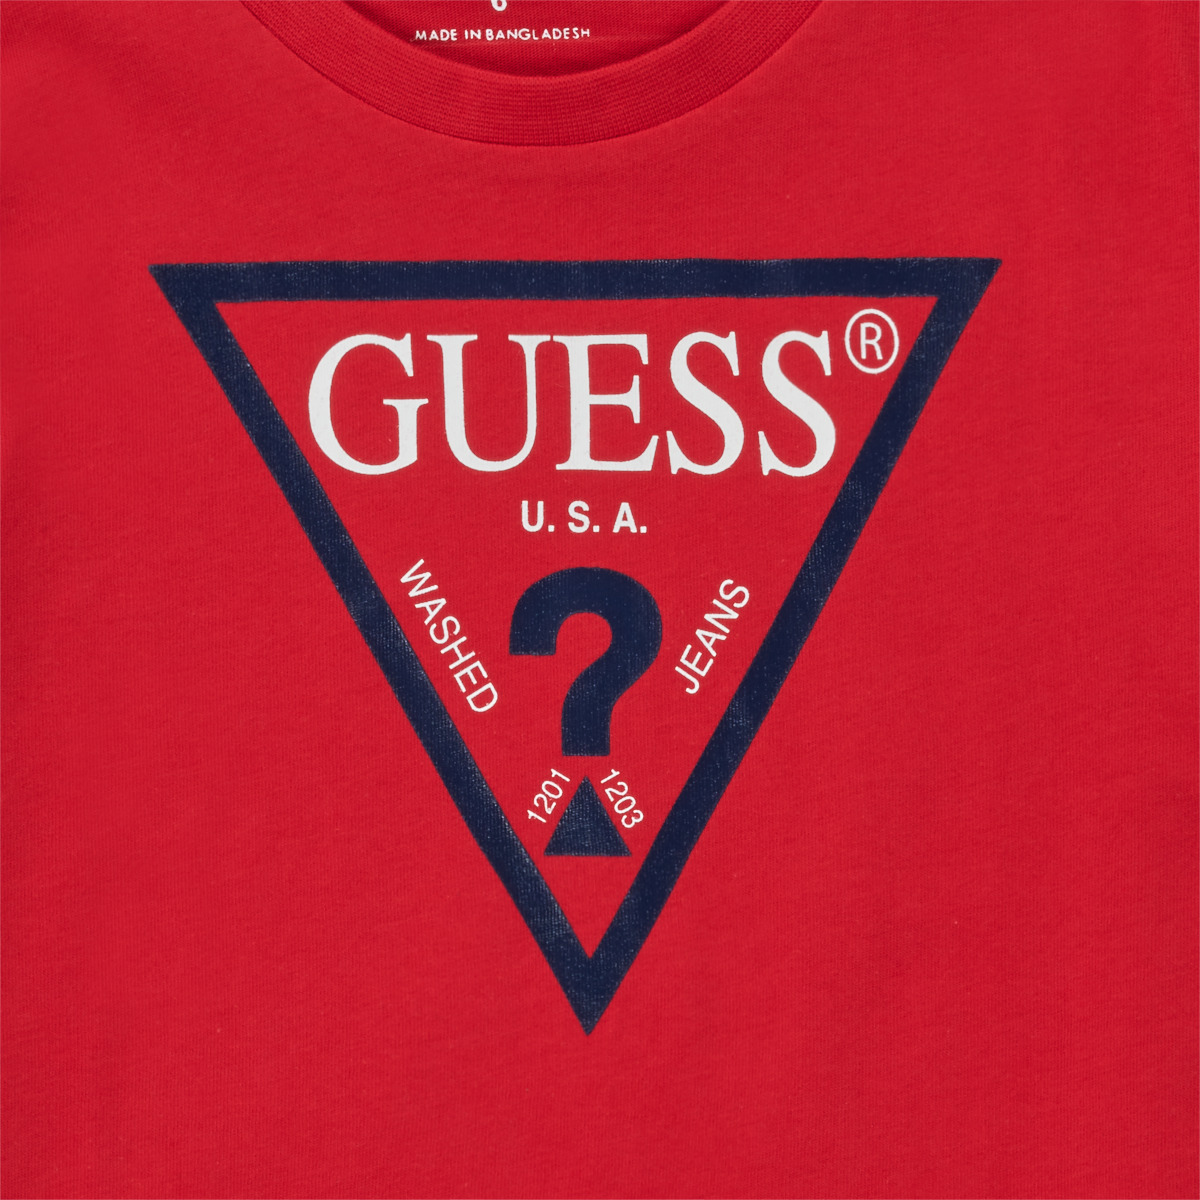 Guess Rouge THERONN okWpZSXv